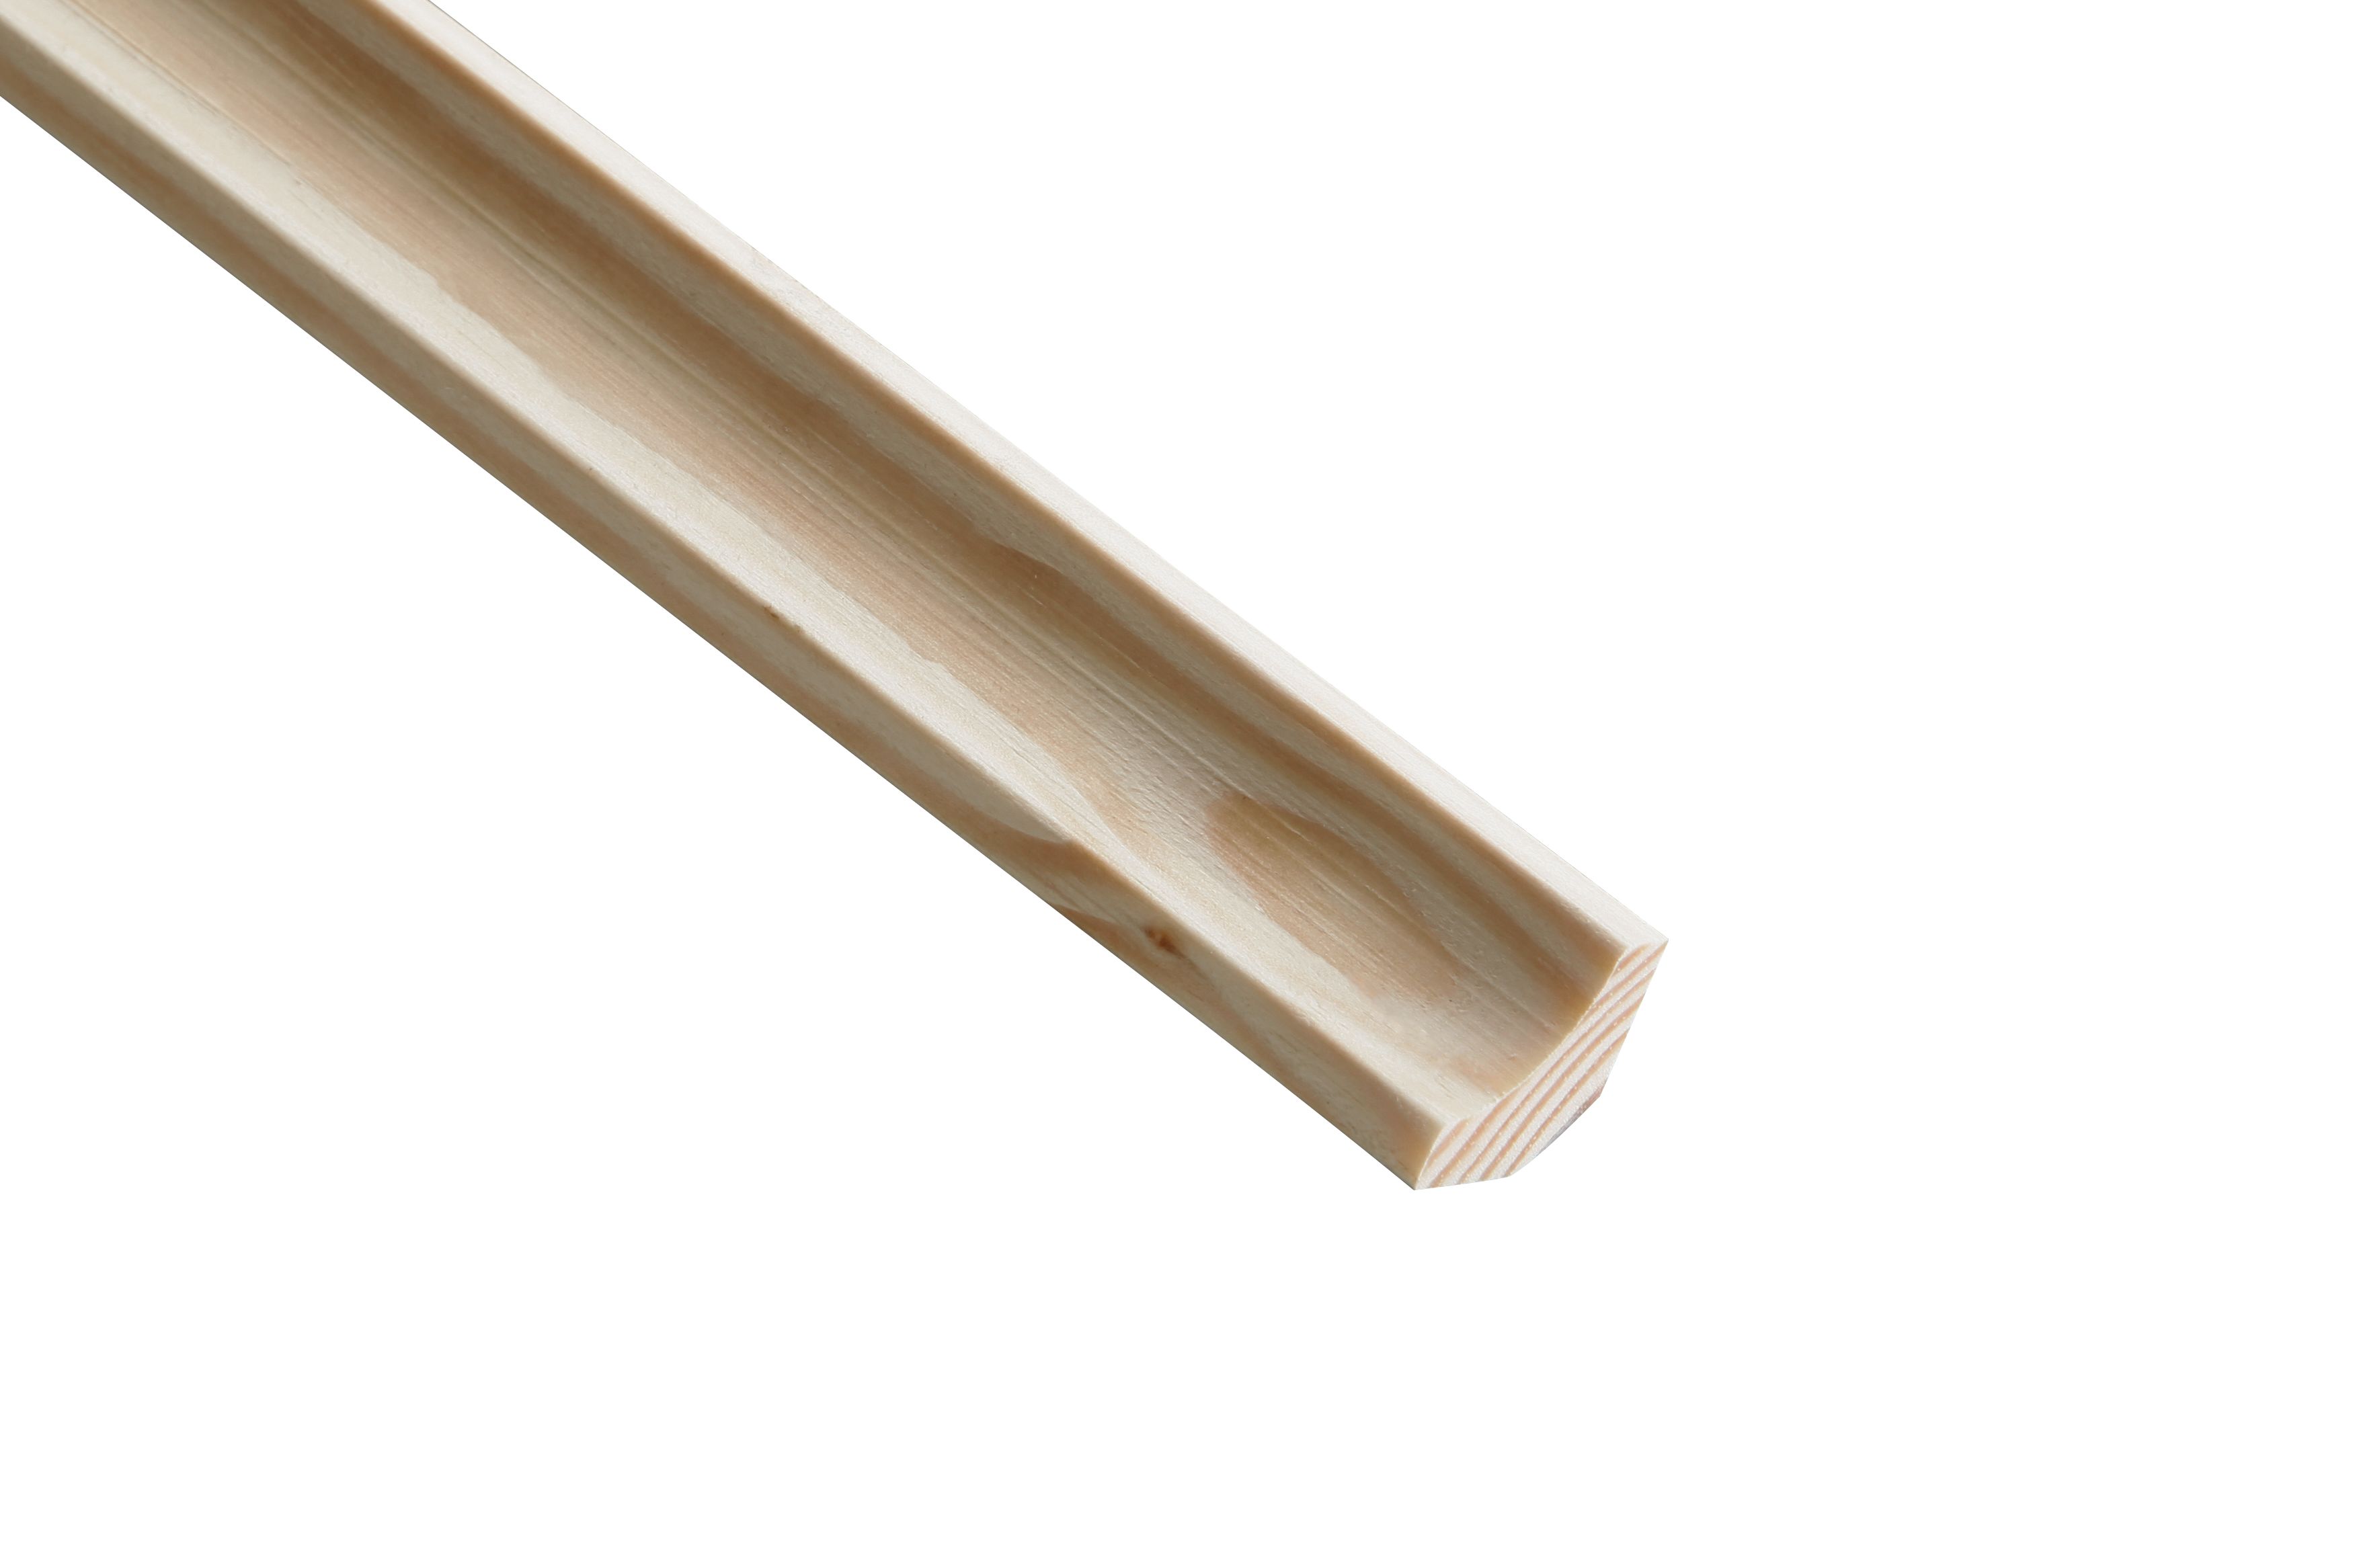 Wickes Pine Scotia Moulding - 18 x 18 x 2400mm